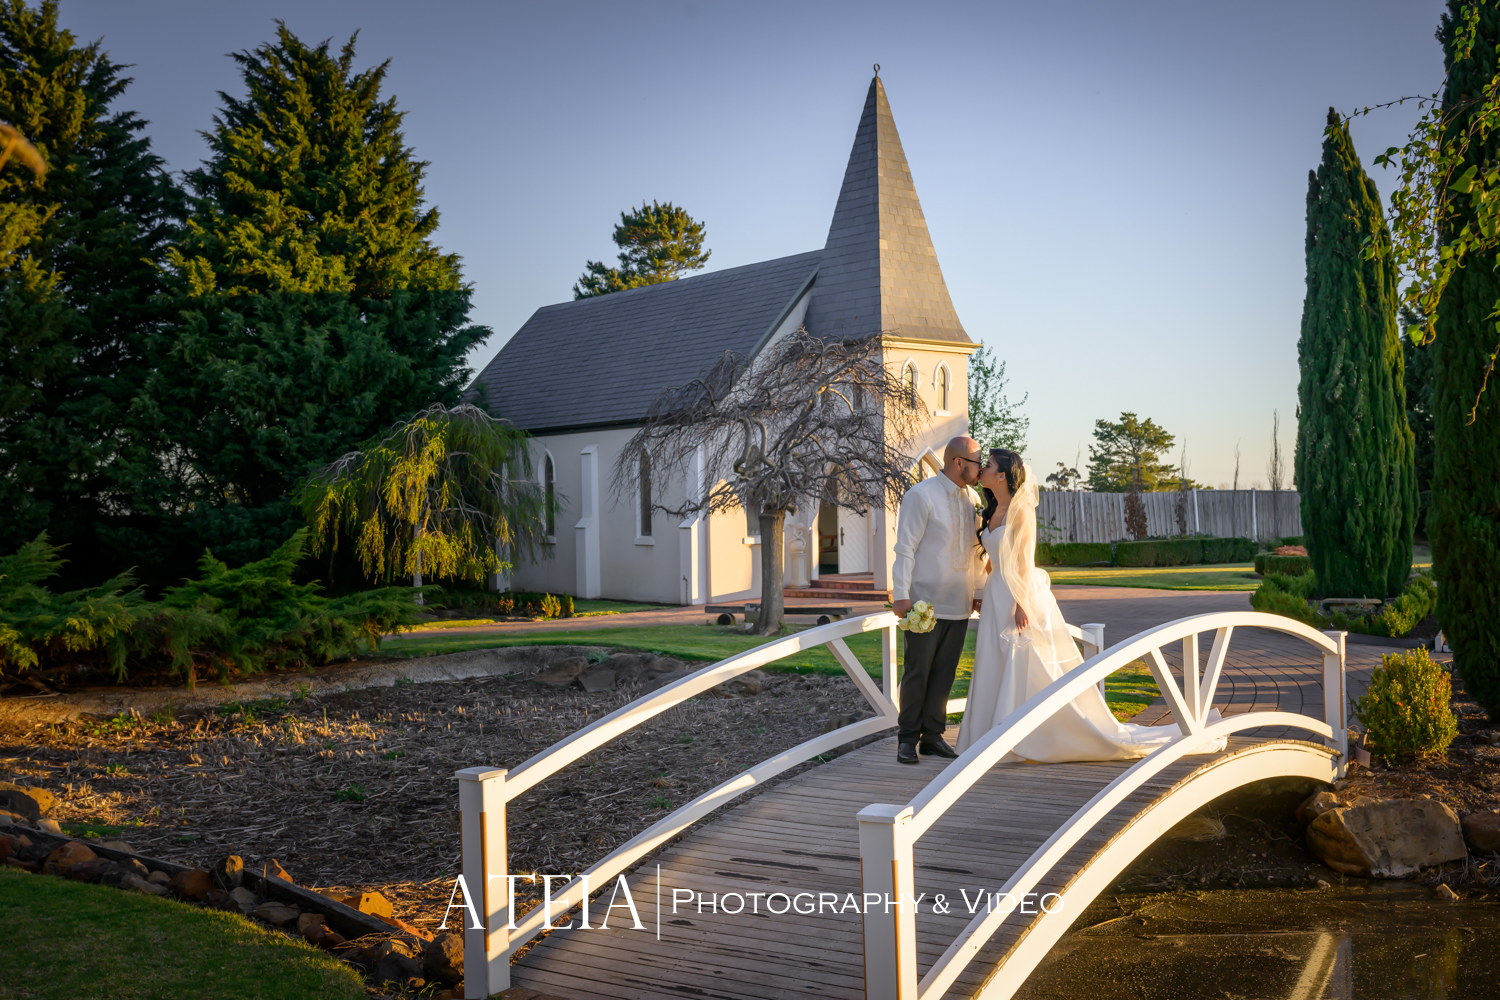 , April and Alexander&#8217;s wedding photography at Windmill Gardens captured by ATEIA Photography &#038; Video